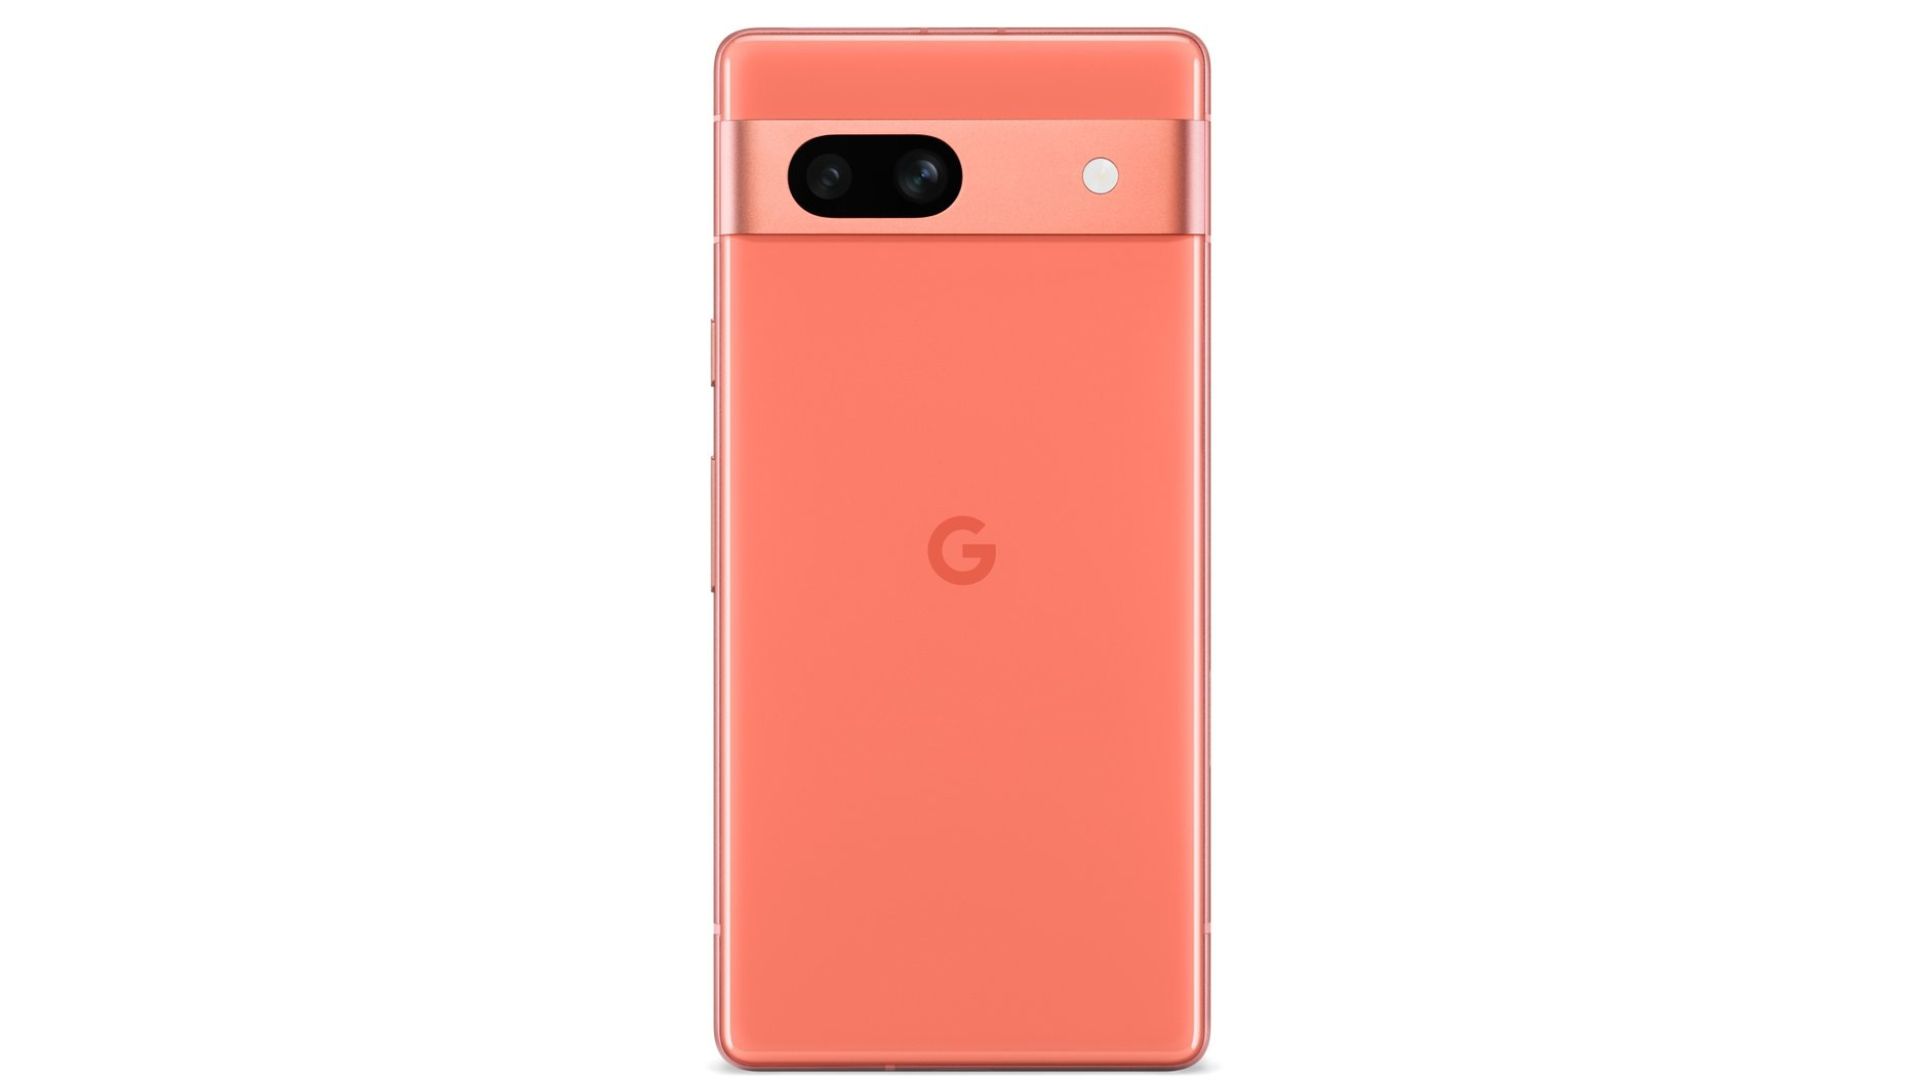 A render of what appears to be the Pixel 7a in orange offset against a white background.